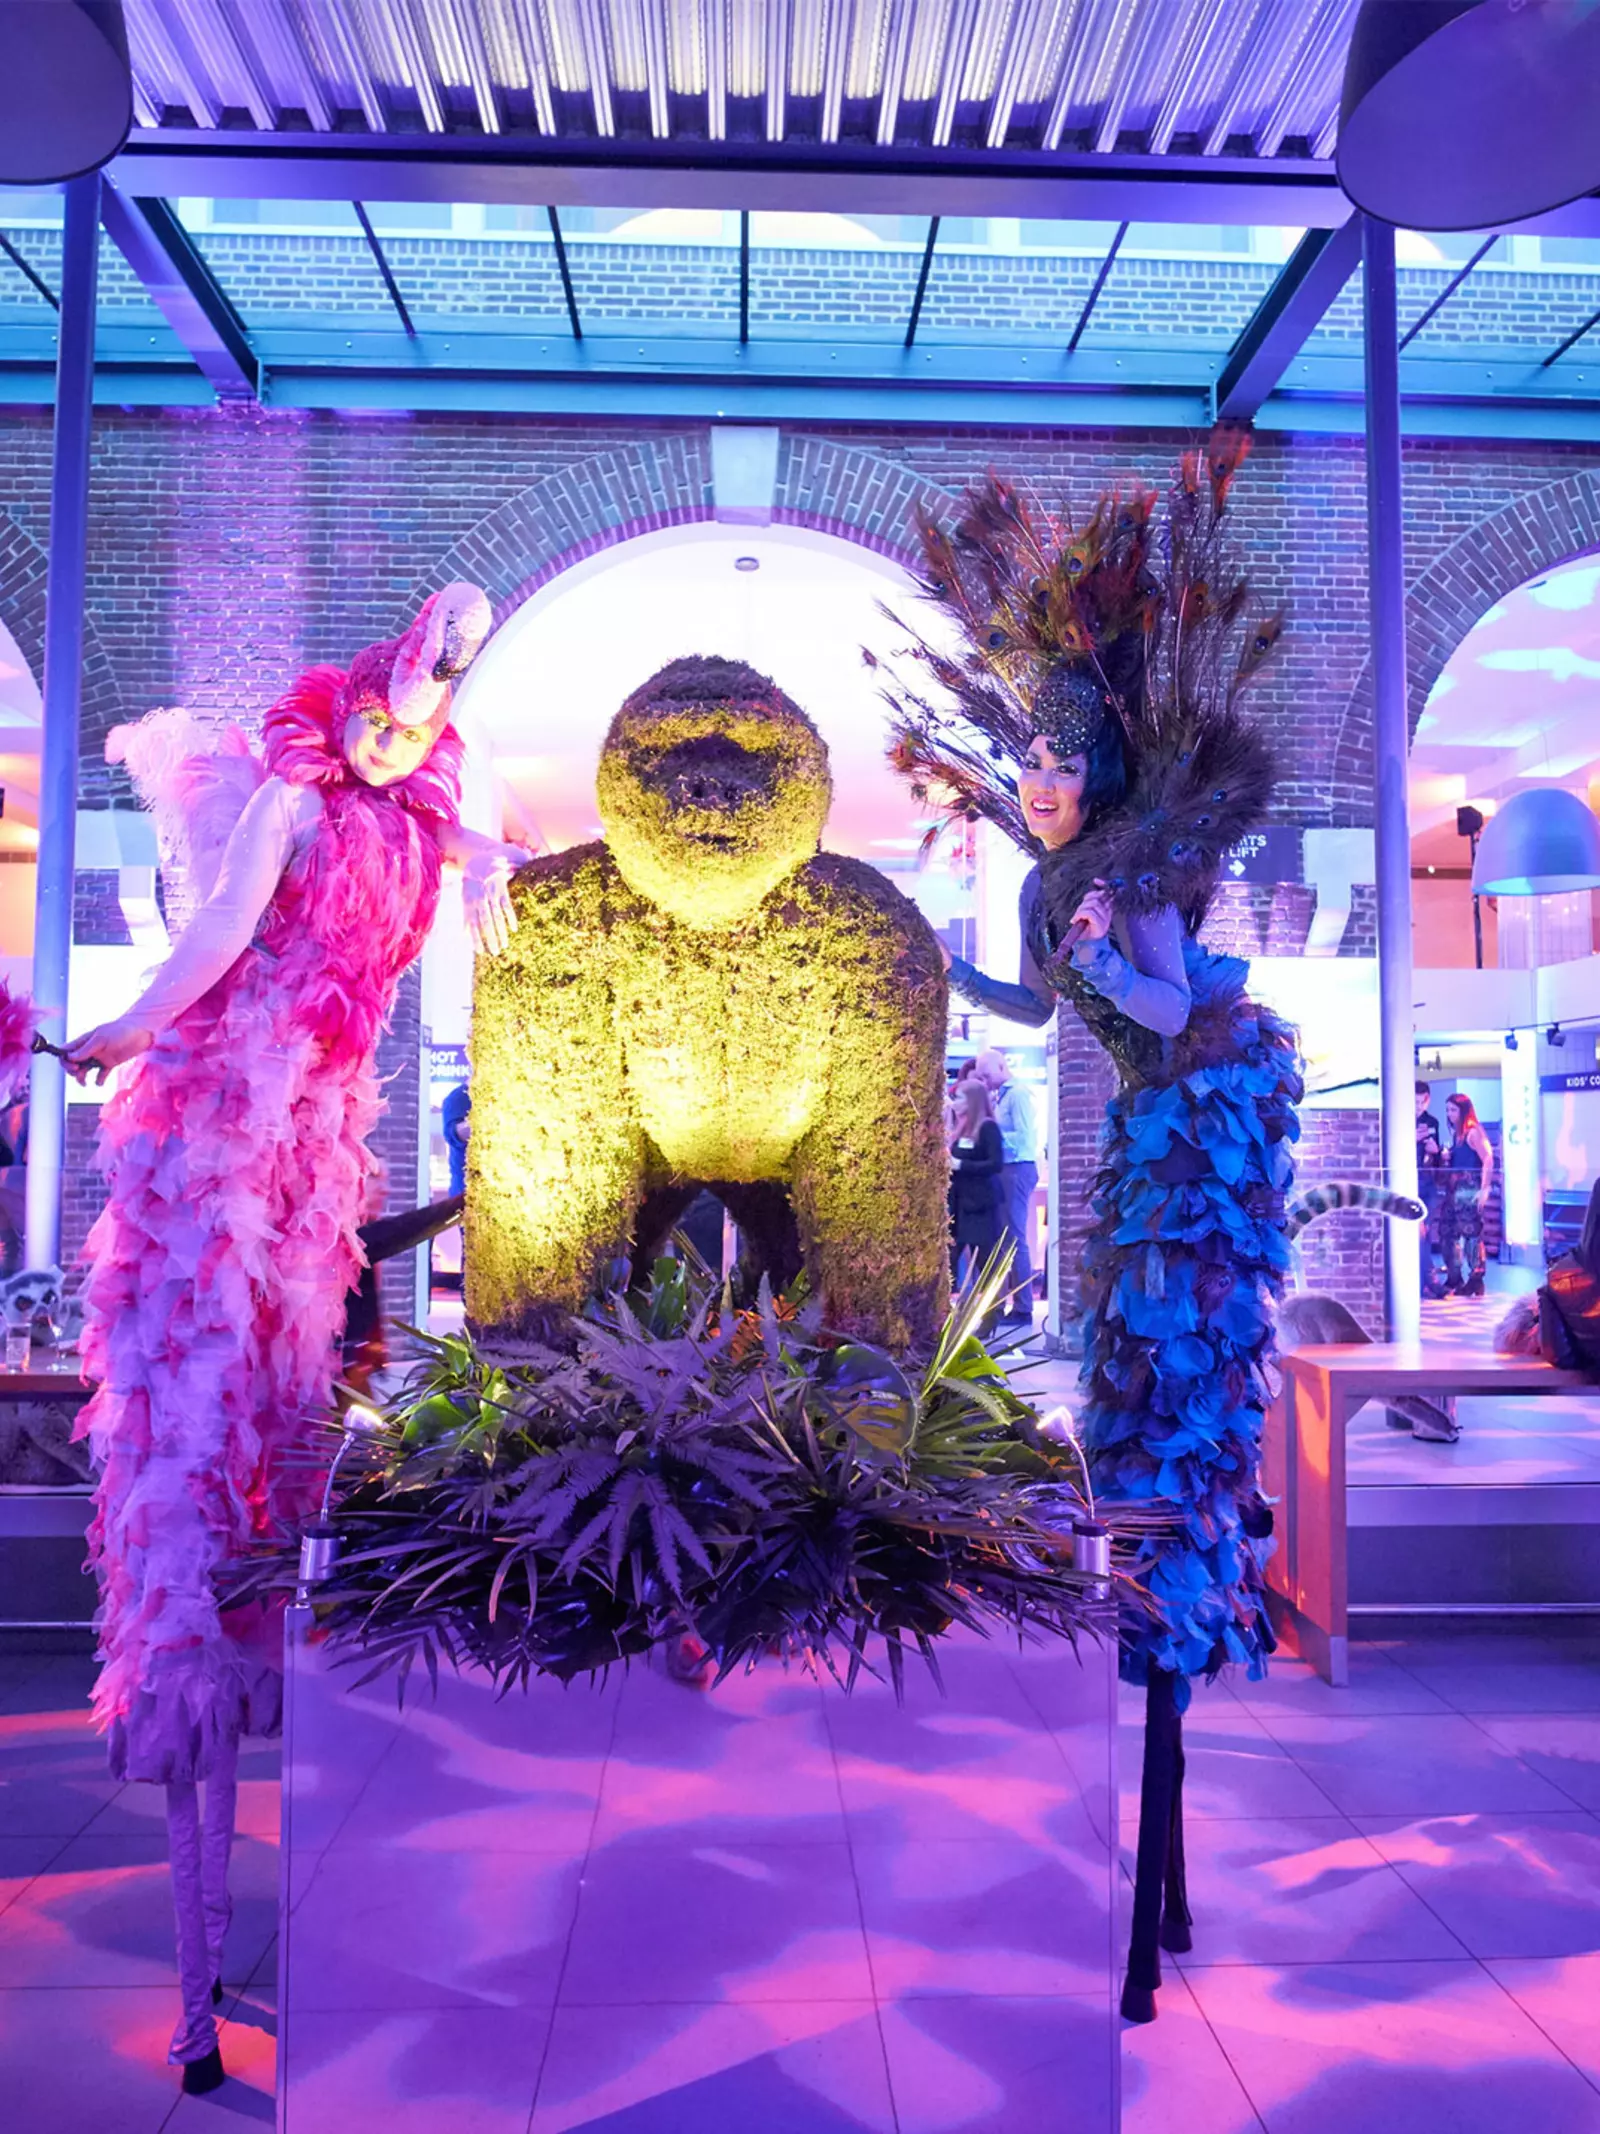 People at an event in The Terrace Restaurant which is decorated with pink lighting and a giant golden gorilla and 